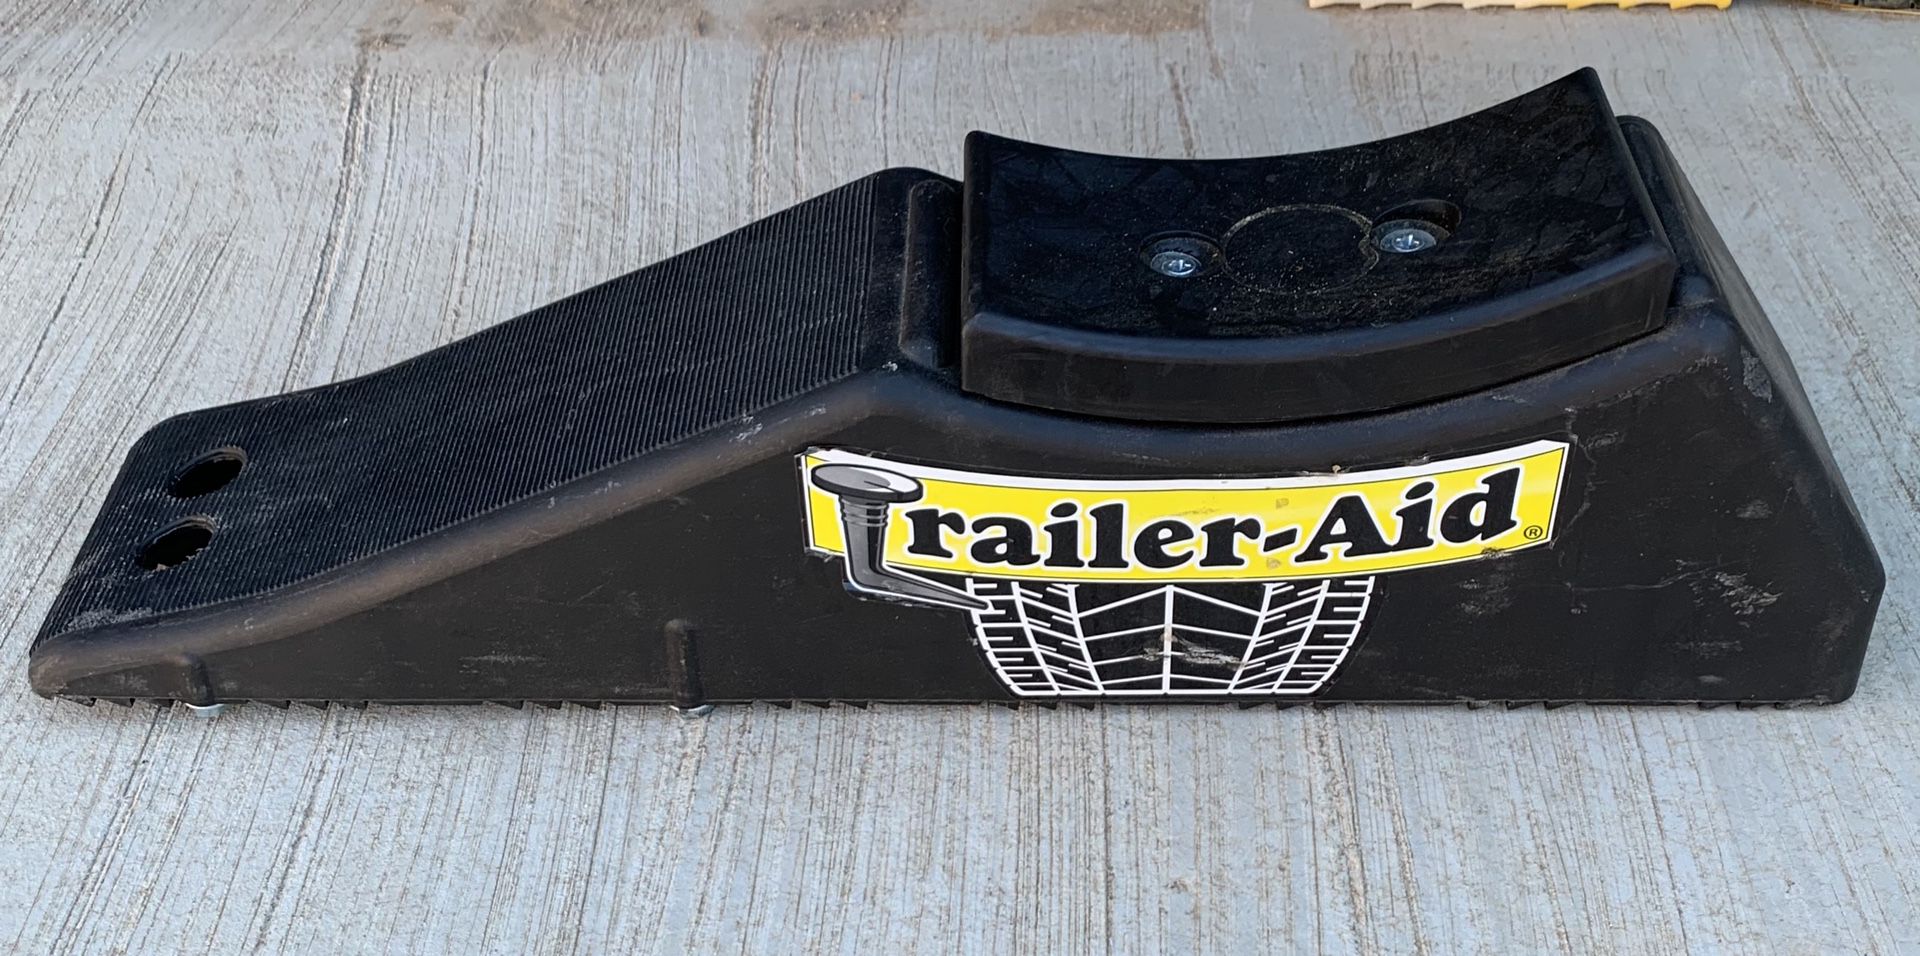 MAKE A REASONABLE OFFER! New! Trailer Aid Plus Tire Change Ramp